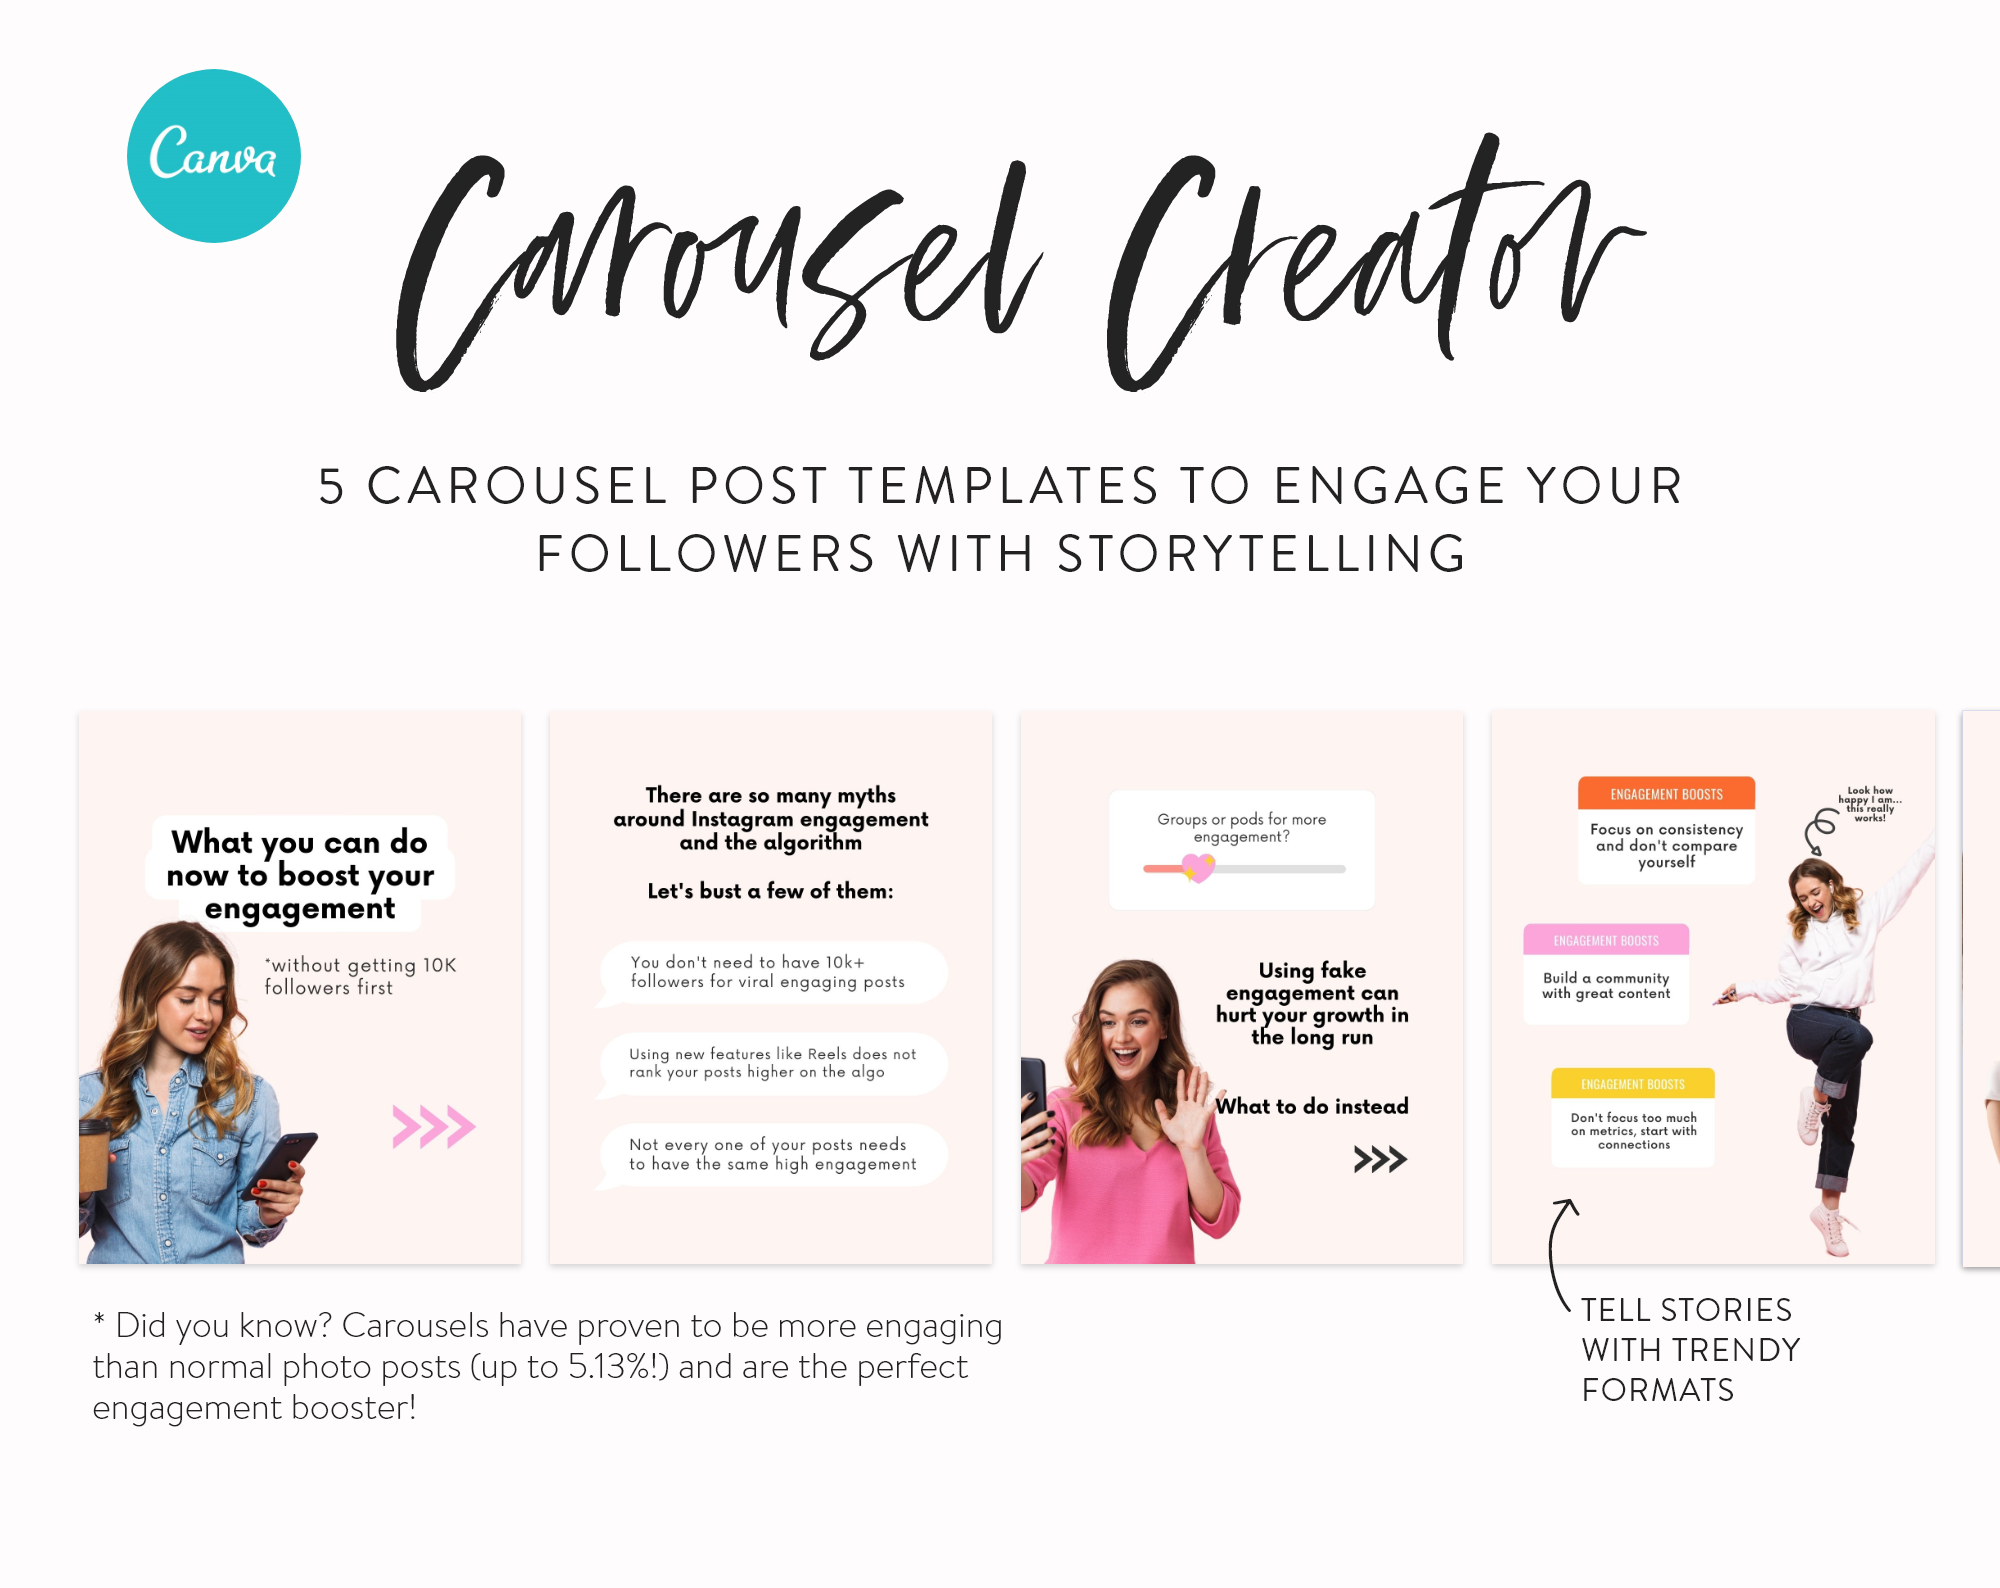 Instagram-Engagement-power-posts-pack-for-canva-carousel-creator-6